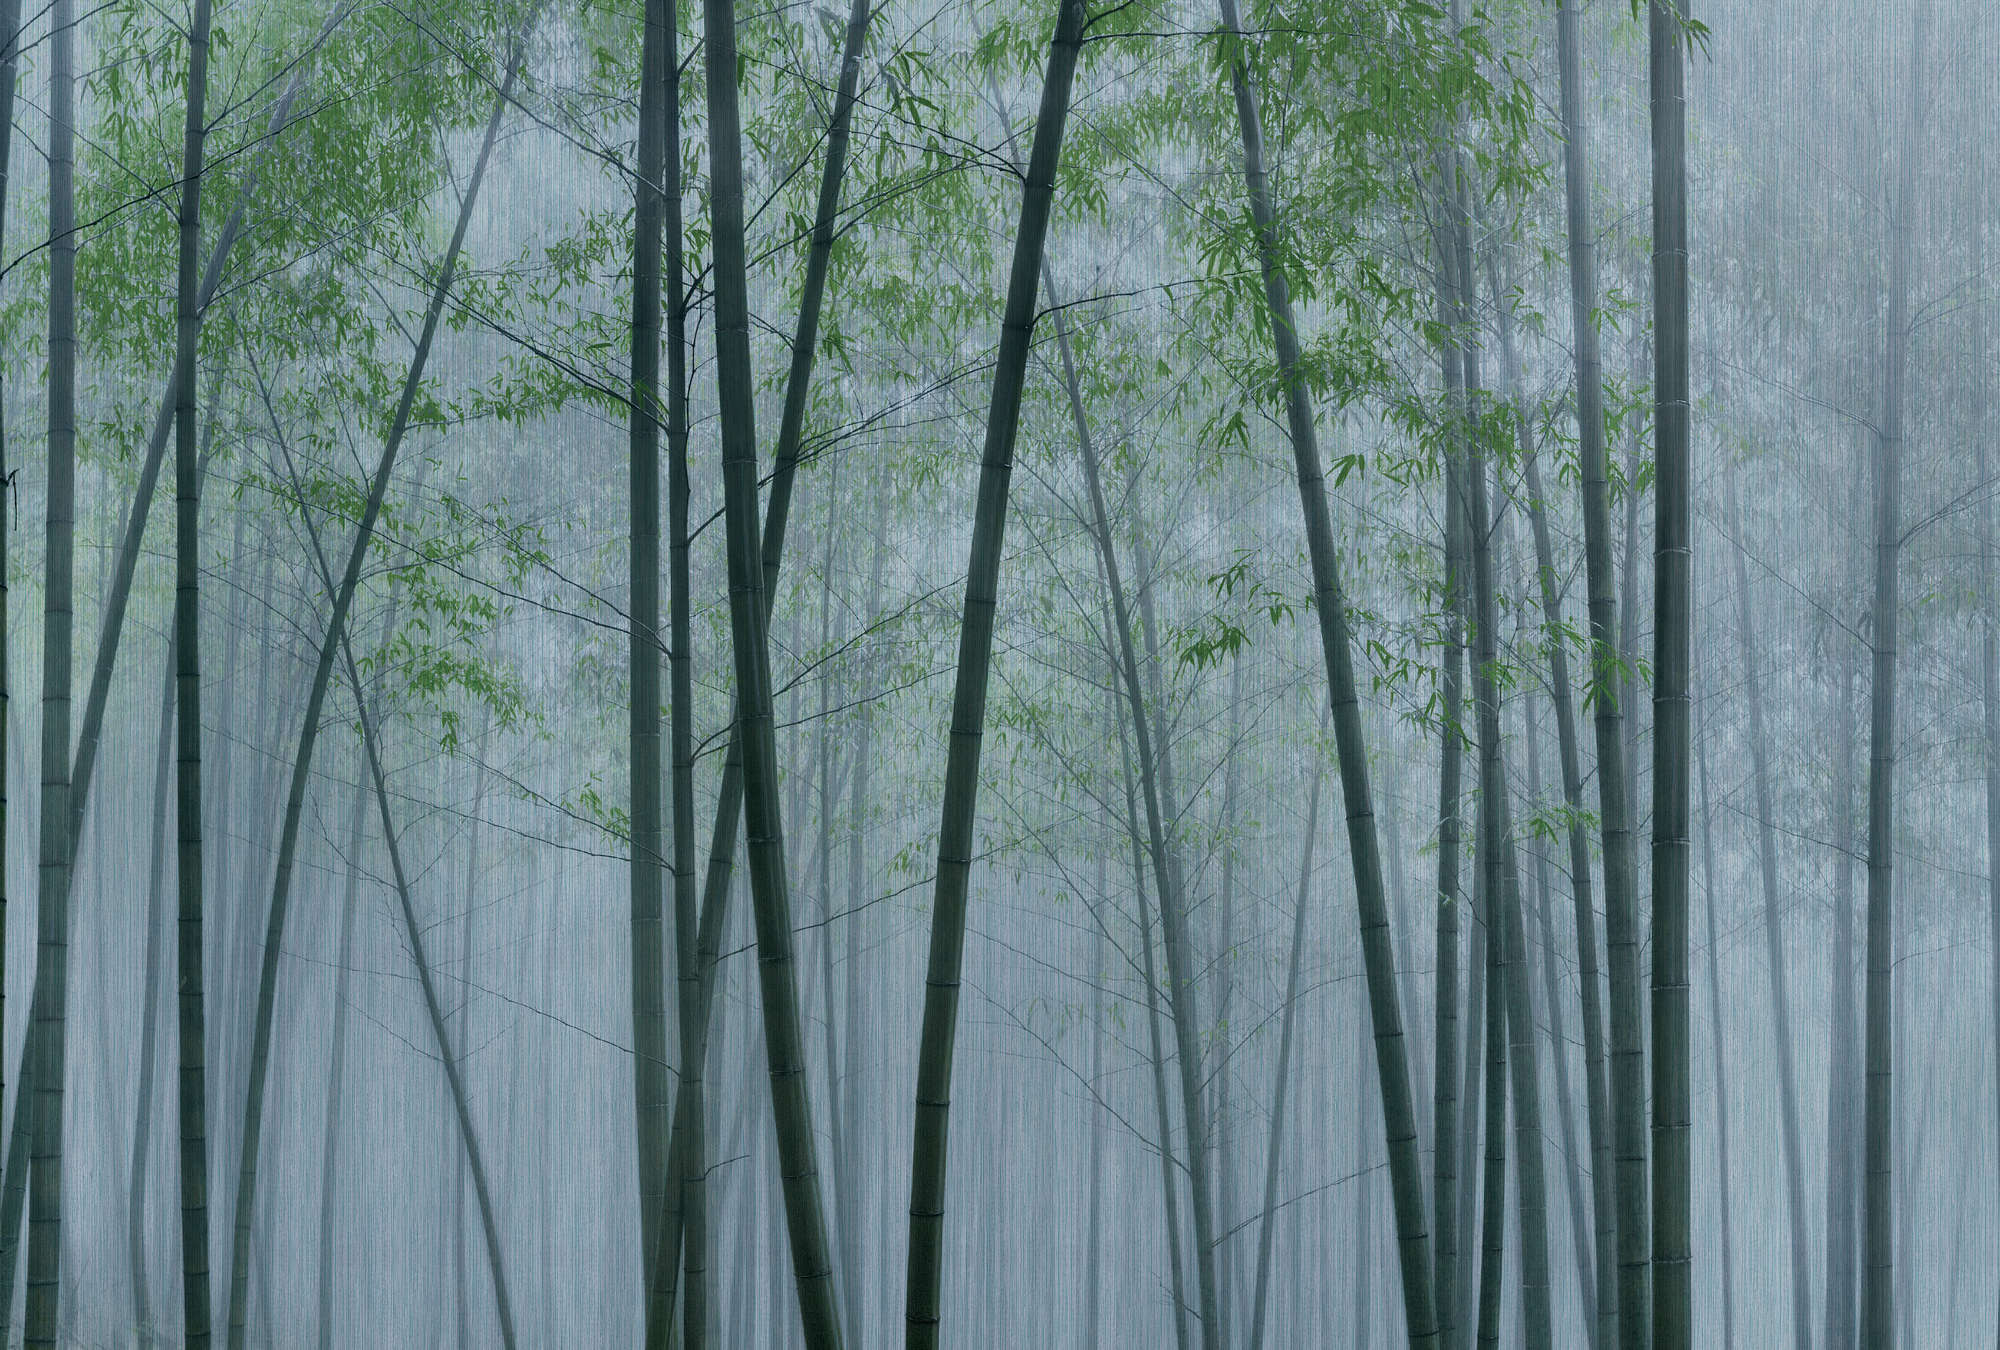             In the Bamboo 2 - mural bamboo forest at dawn
        